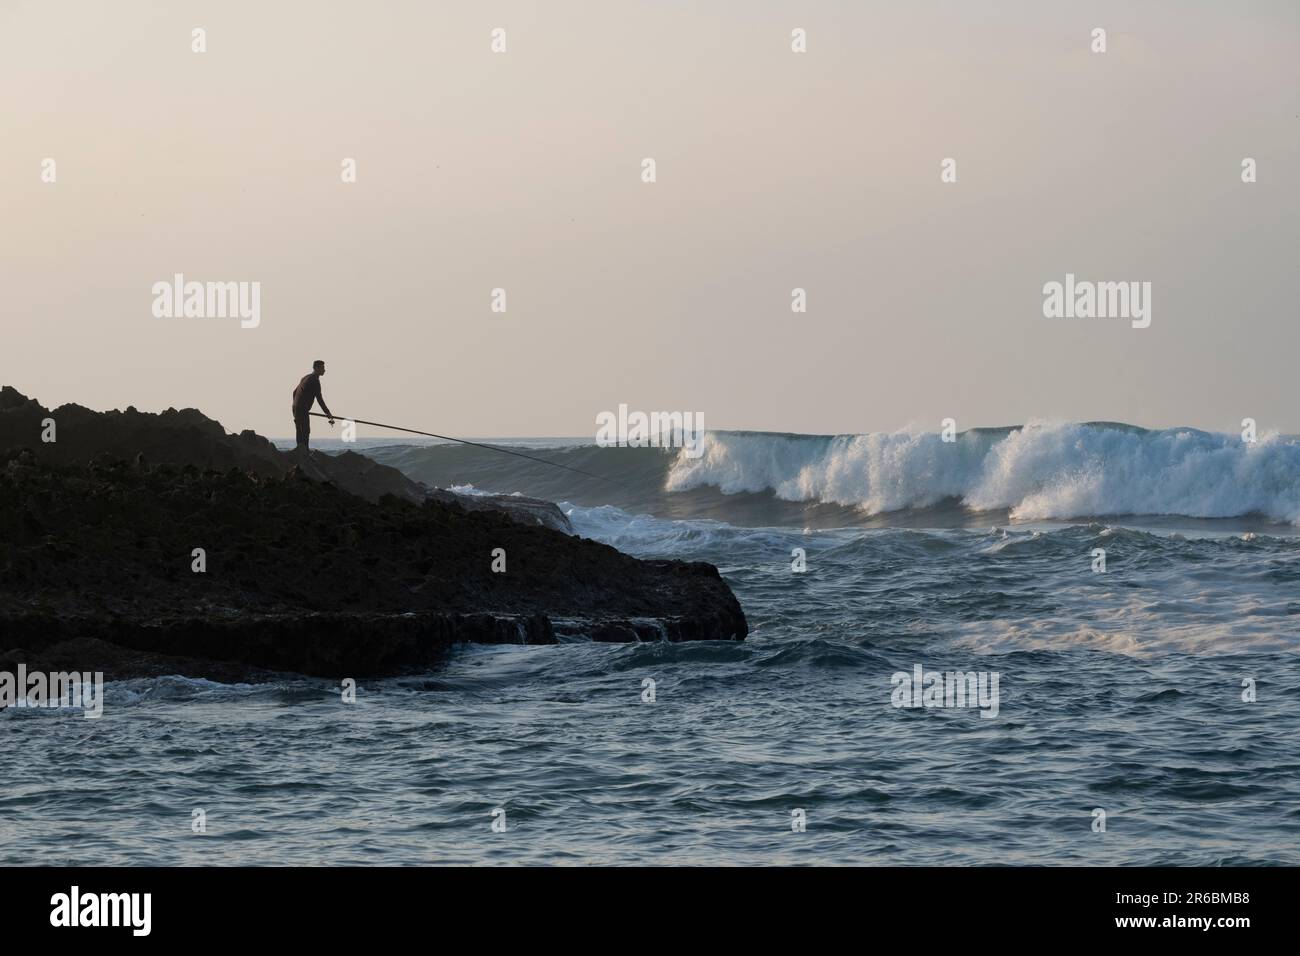 A silhouette fisherman standing on a rocky Atlantic ocean outcrop with his fishing rod pointed towards the crashing waves at Oualidia, Morocco Stock Photo